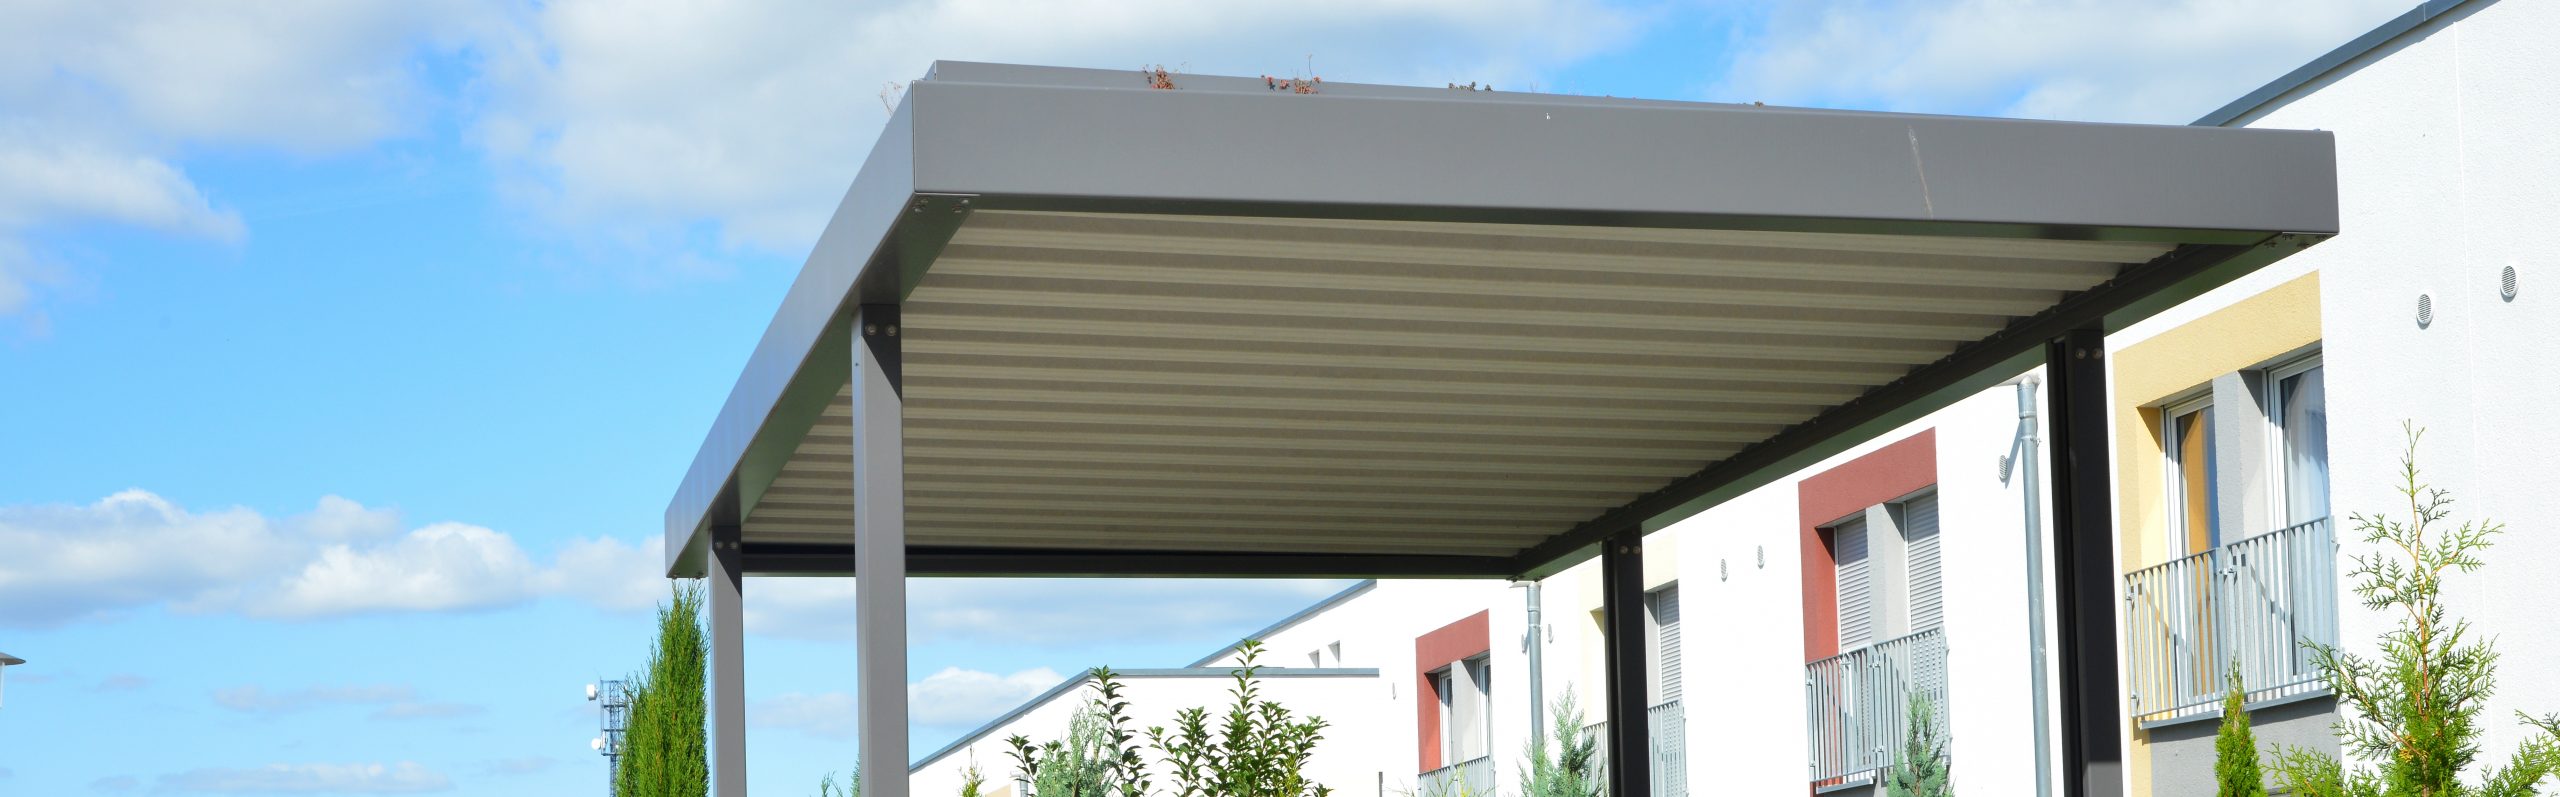 New Metal Carport with greened Roof in Front of a Multi Family residential Building